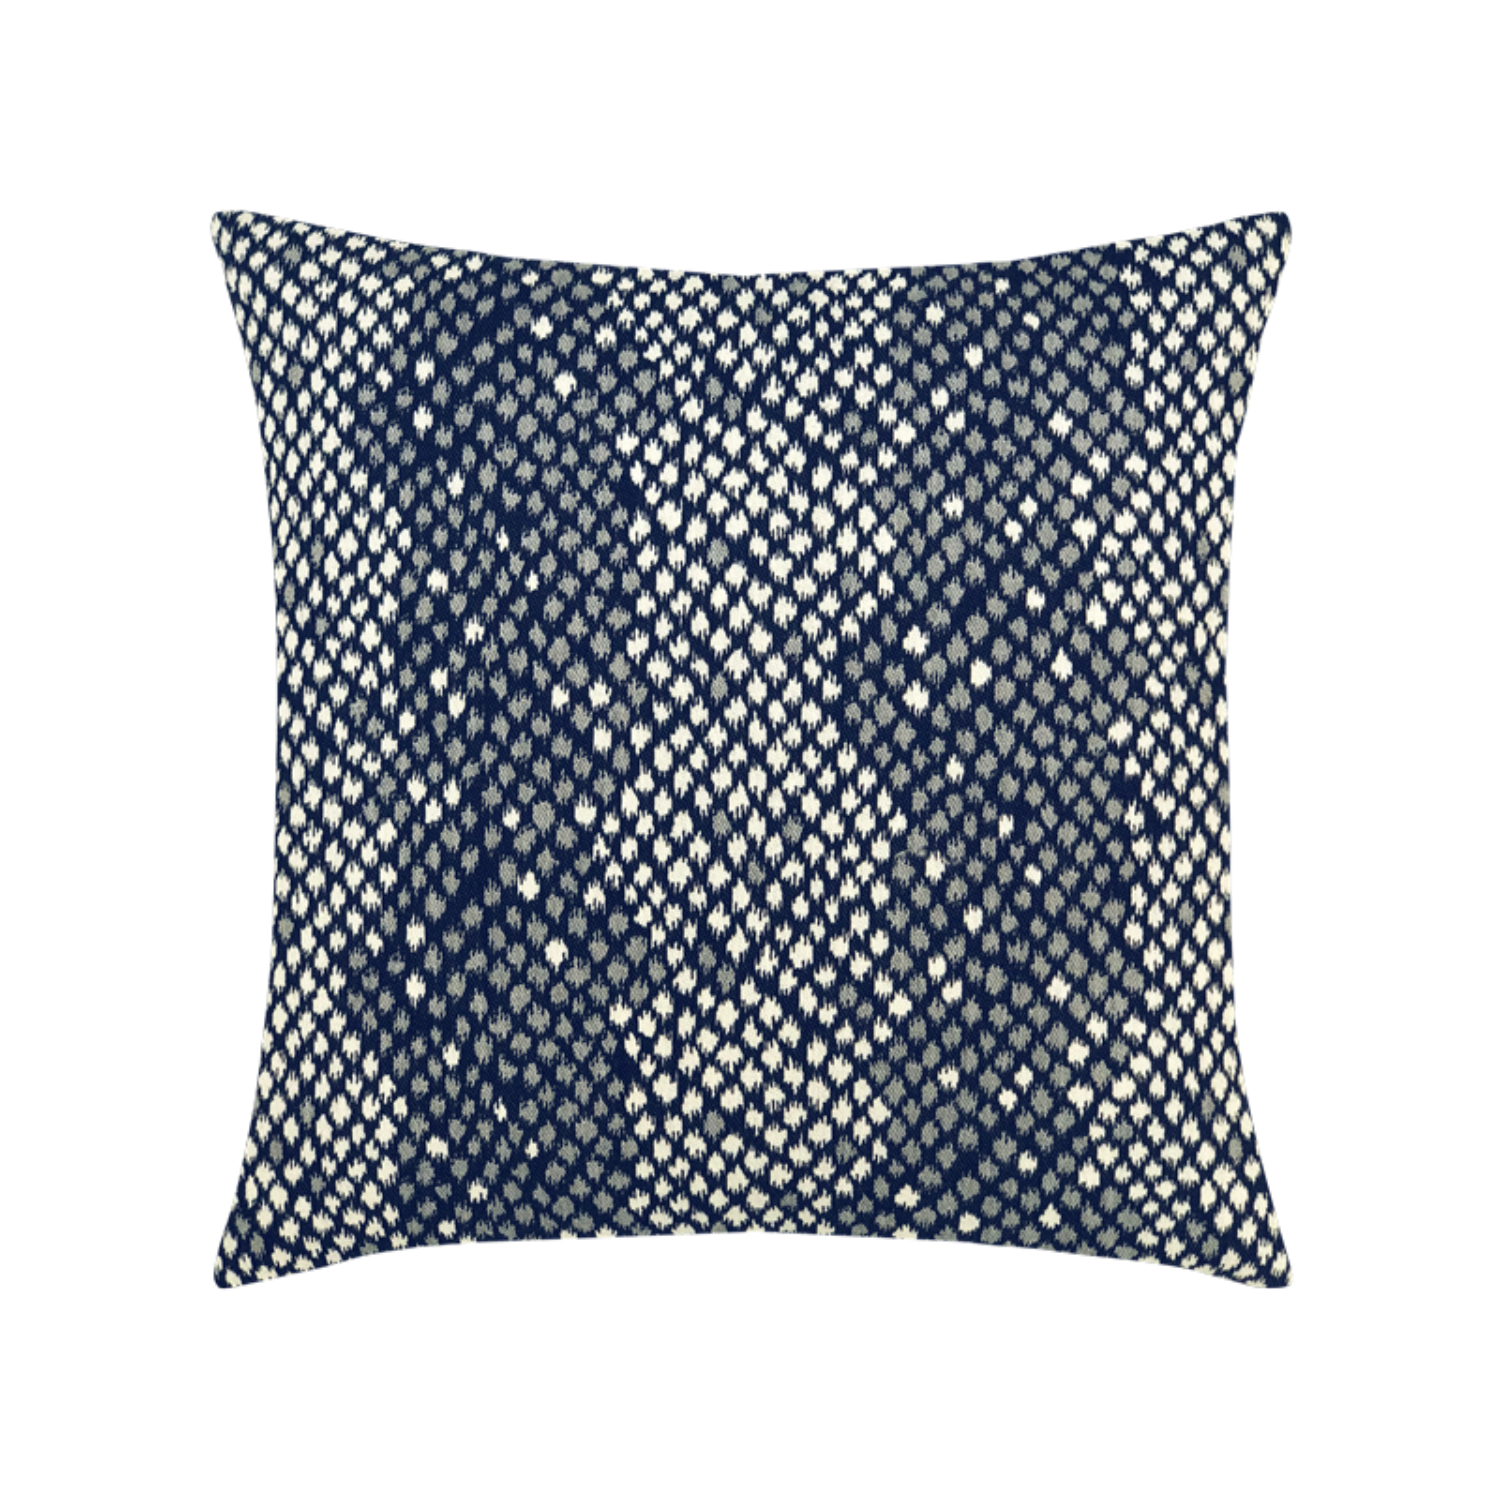 SALE! Elaine Smith 20 inch Square Outdoor Pillow - Python Midnight - Polyester Fiber Fill Throw Pillows 12030988